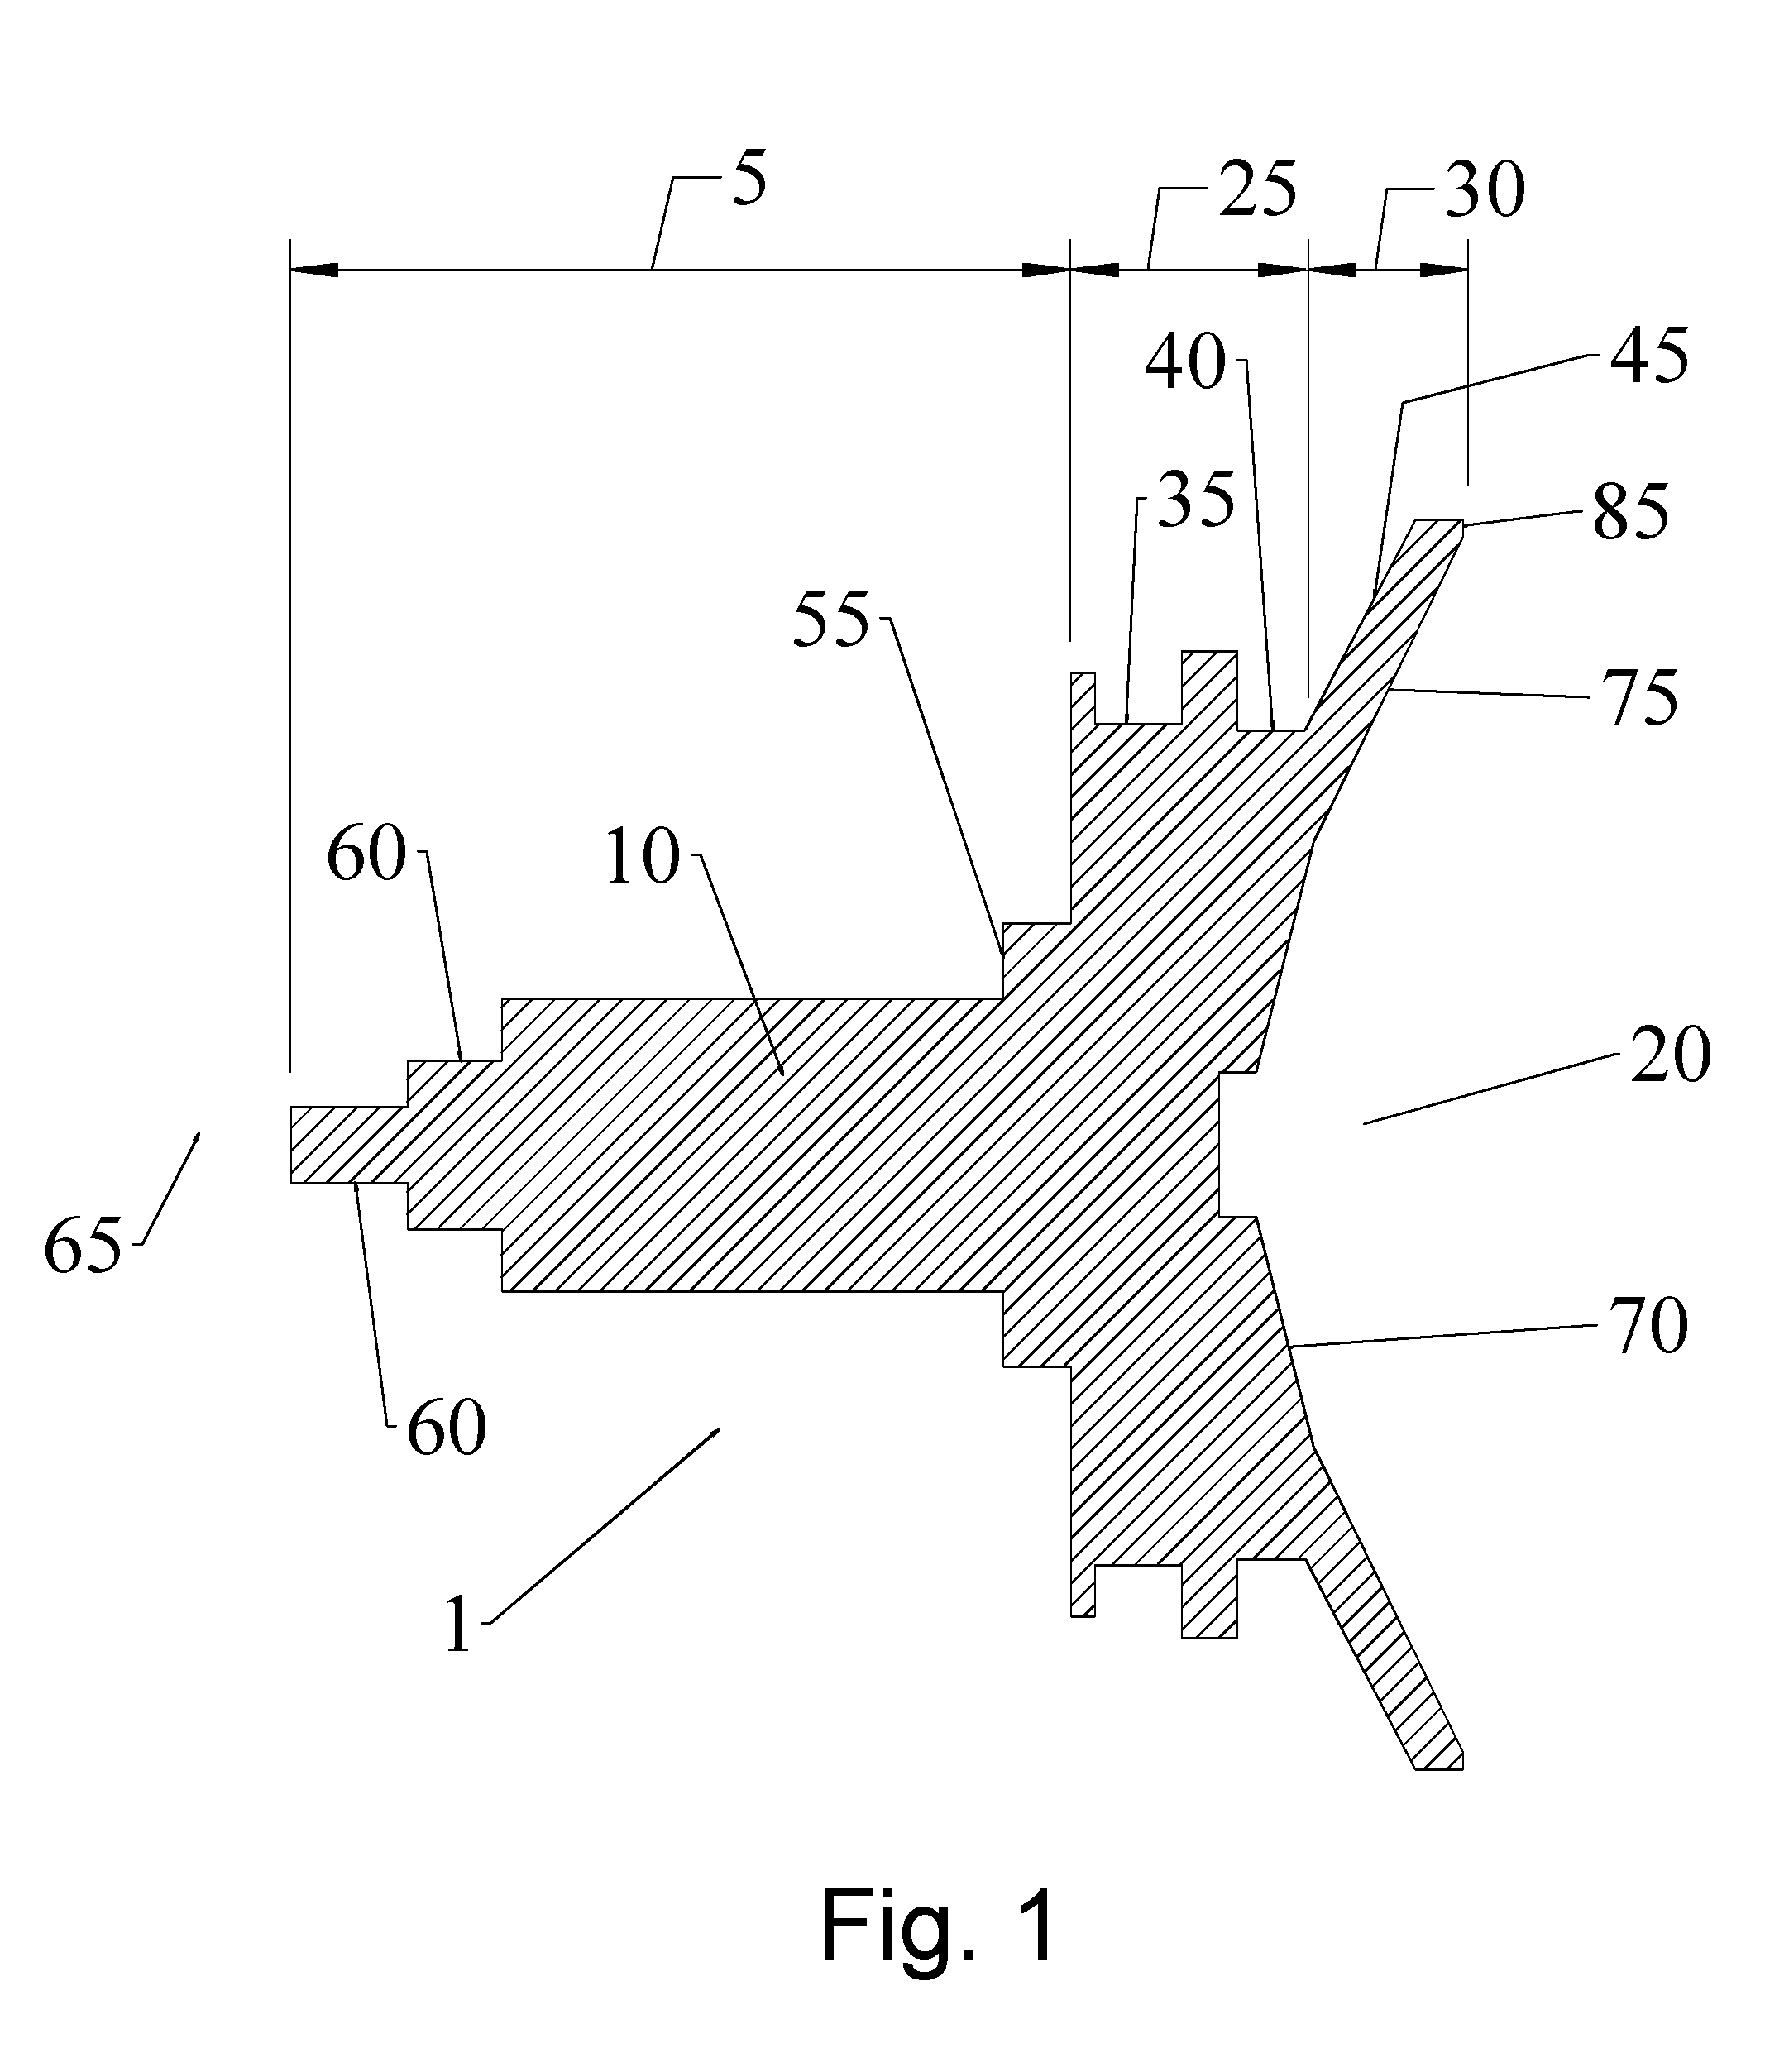 Method for dish reflector illumination via sub-reflector assembly with dielectric radiator portion